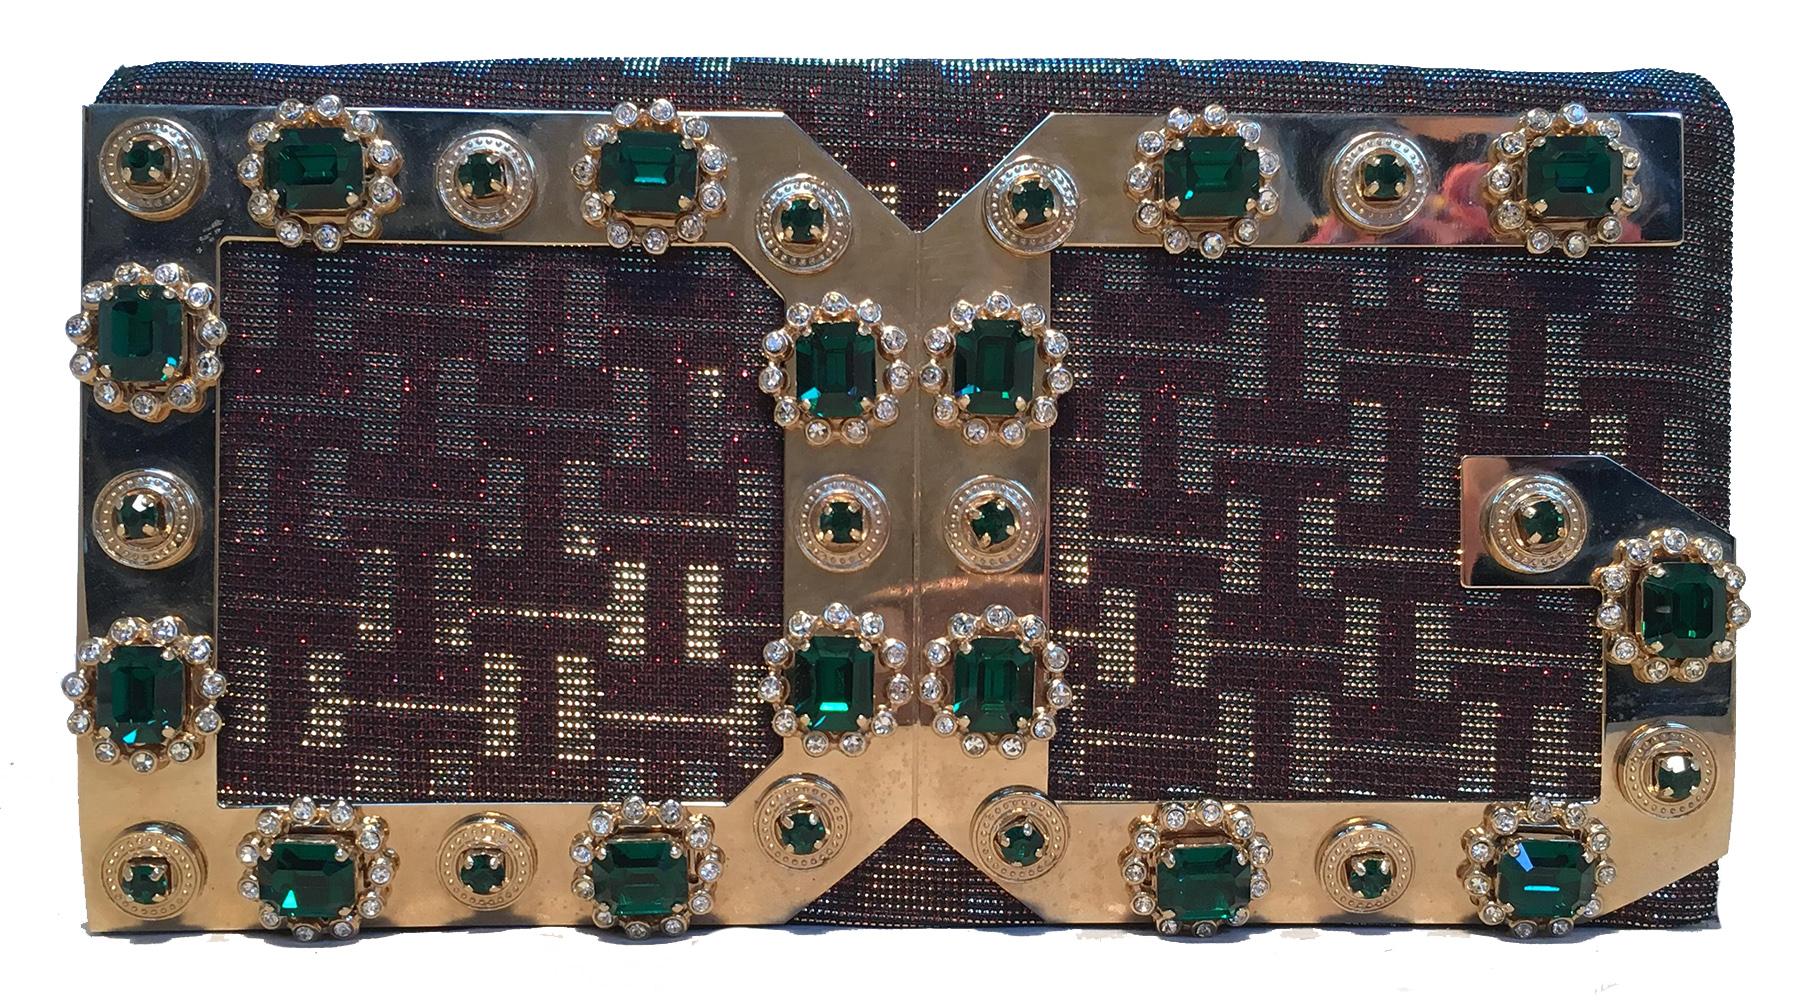 Dolce and Gabbana Iridescent DG Rhinestone Clutch in excellent condition. Iridescent woven nylon exterior trimmed with gold hardware and green rhinestones along front DG logo design. Snap flap closure opens to a black nylon interior that holds one